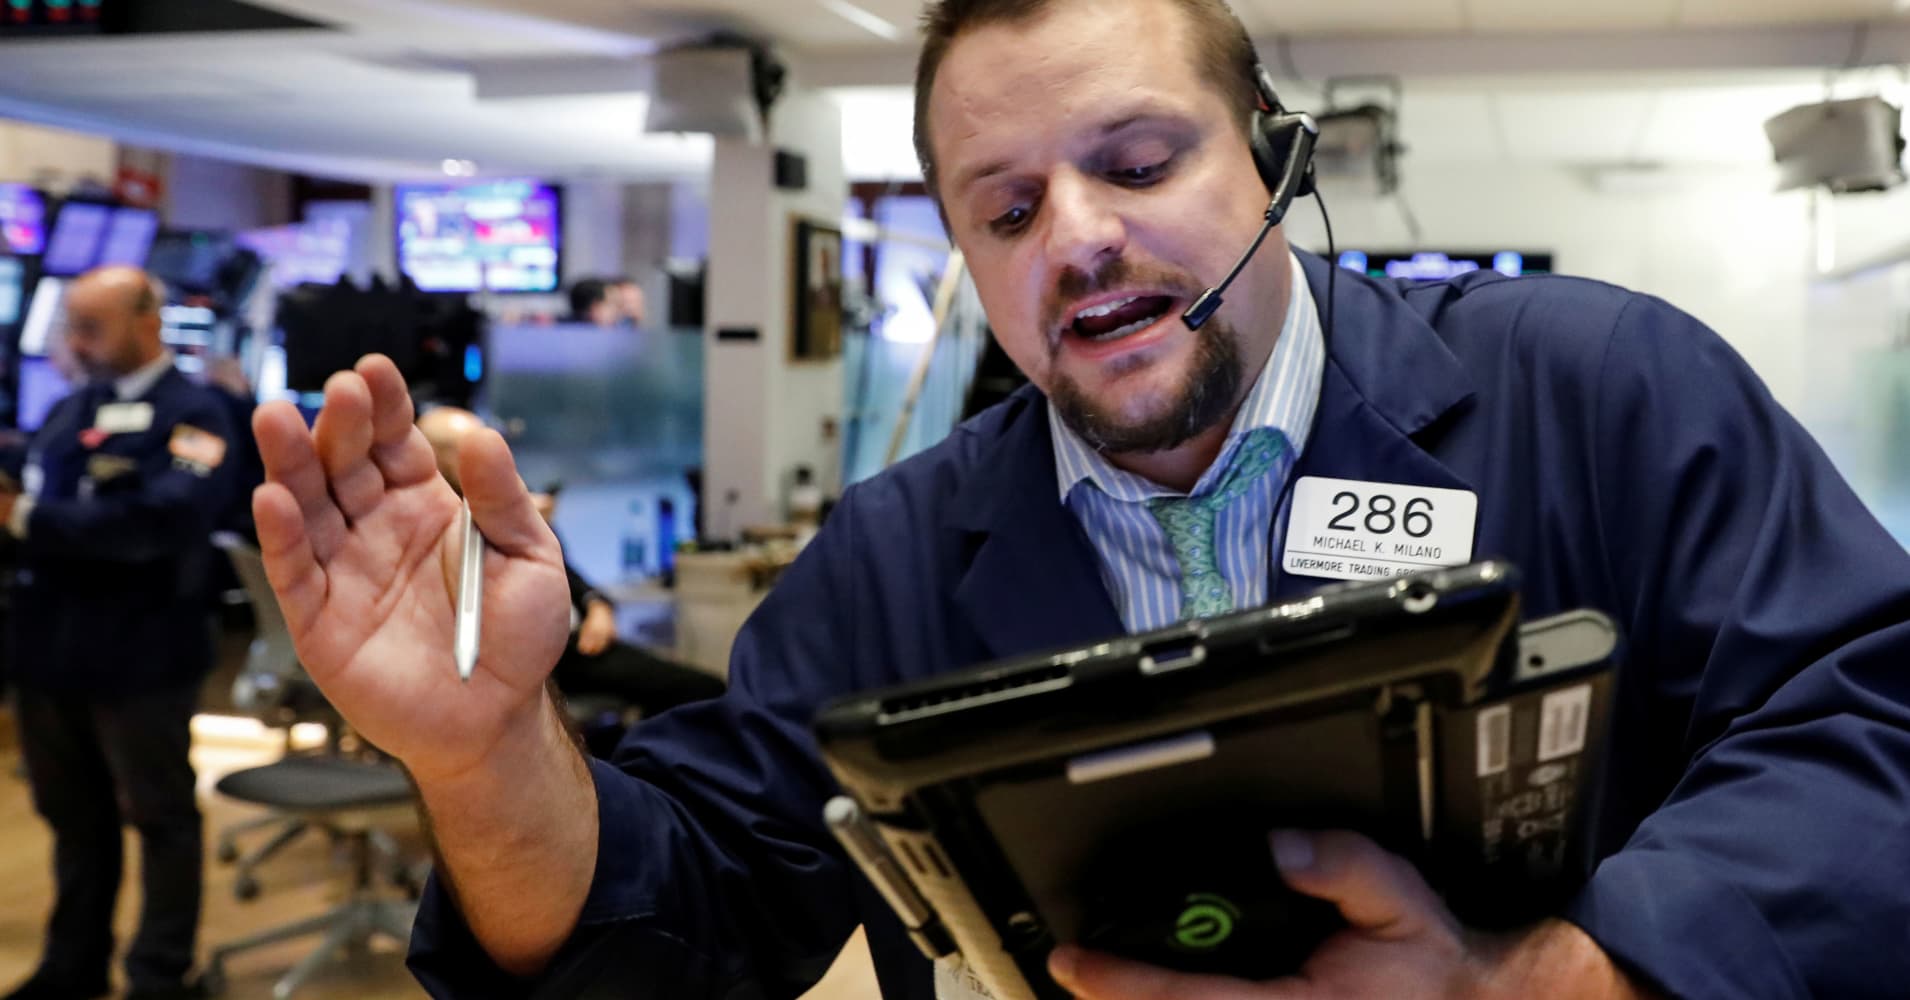 Dow climbs more than 200 points to notch its first 3-day winning streak since November